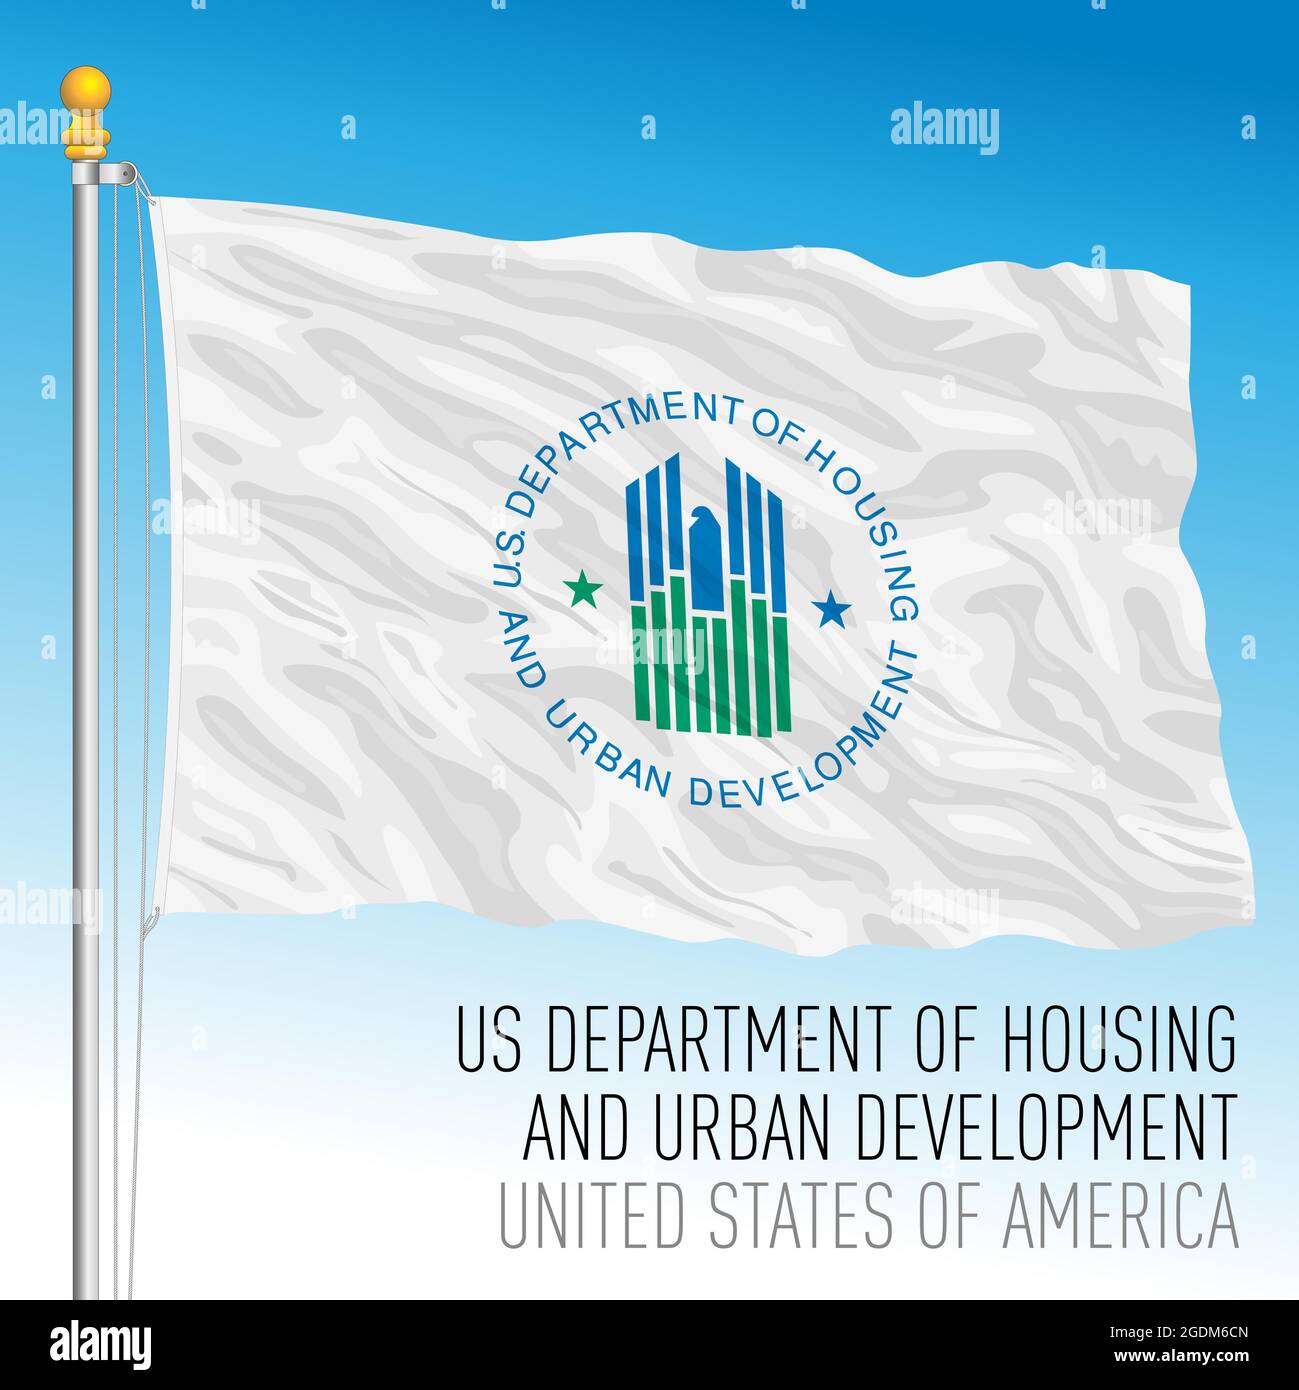 US Department of Housing and Urban Development flag, United States of America, vector illustration Stock Vector